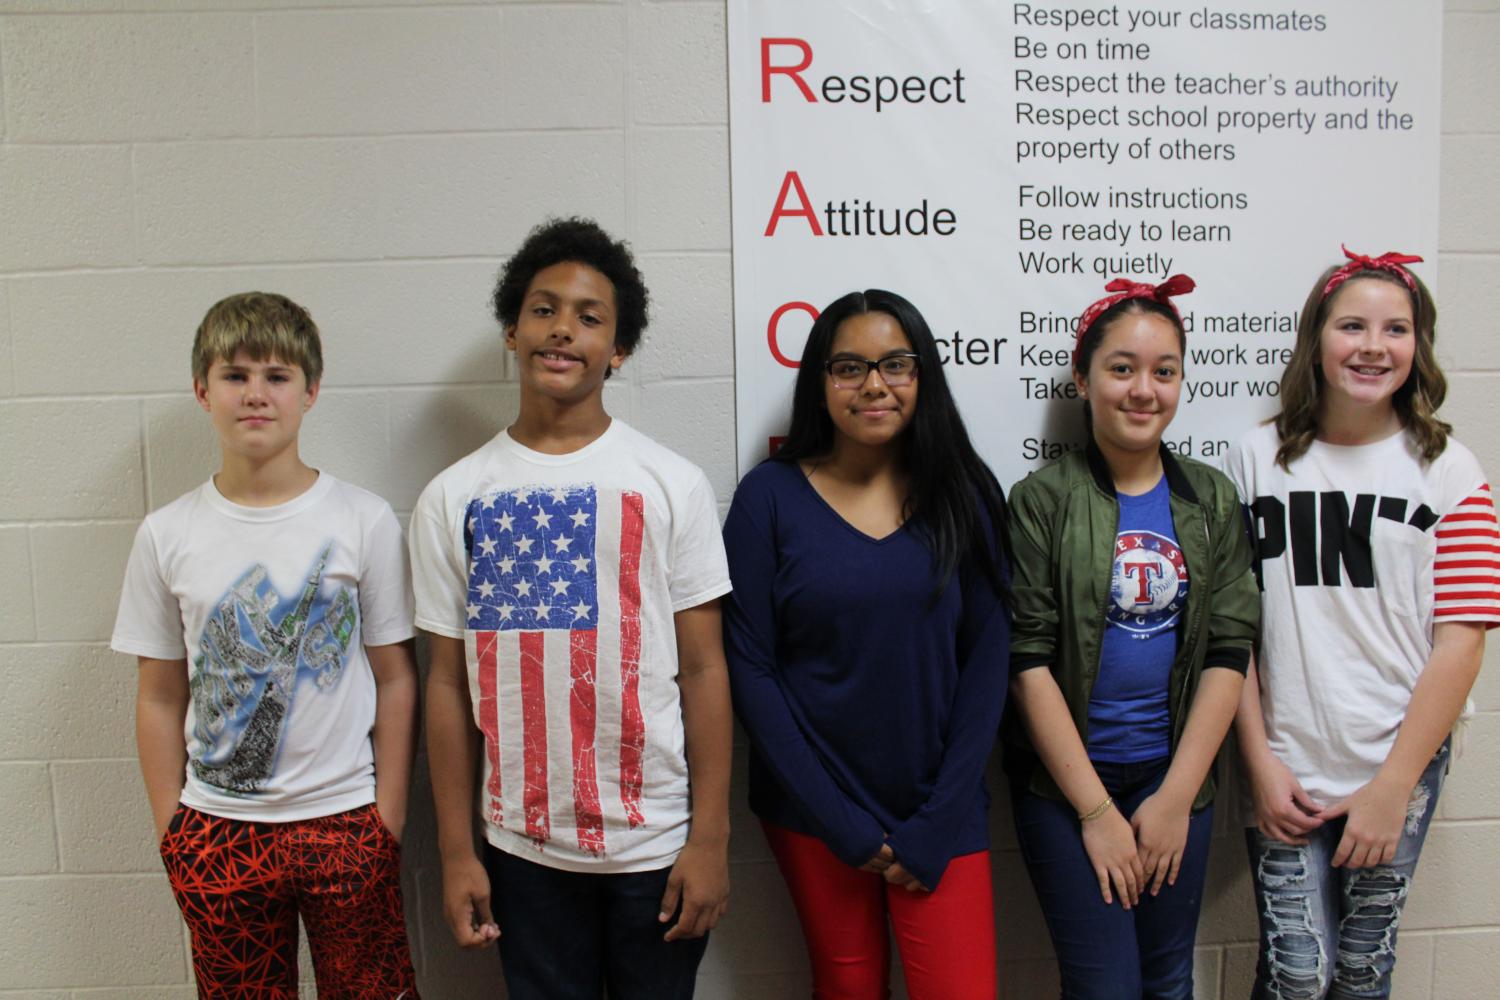 Paeton Dial, Eric Costa, Marlynne Vargas, Jessica Hernandez and Gracie Reid were among the students who dressed up Monday in their red, white and blue.